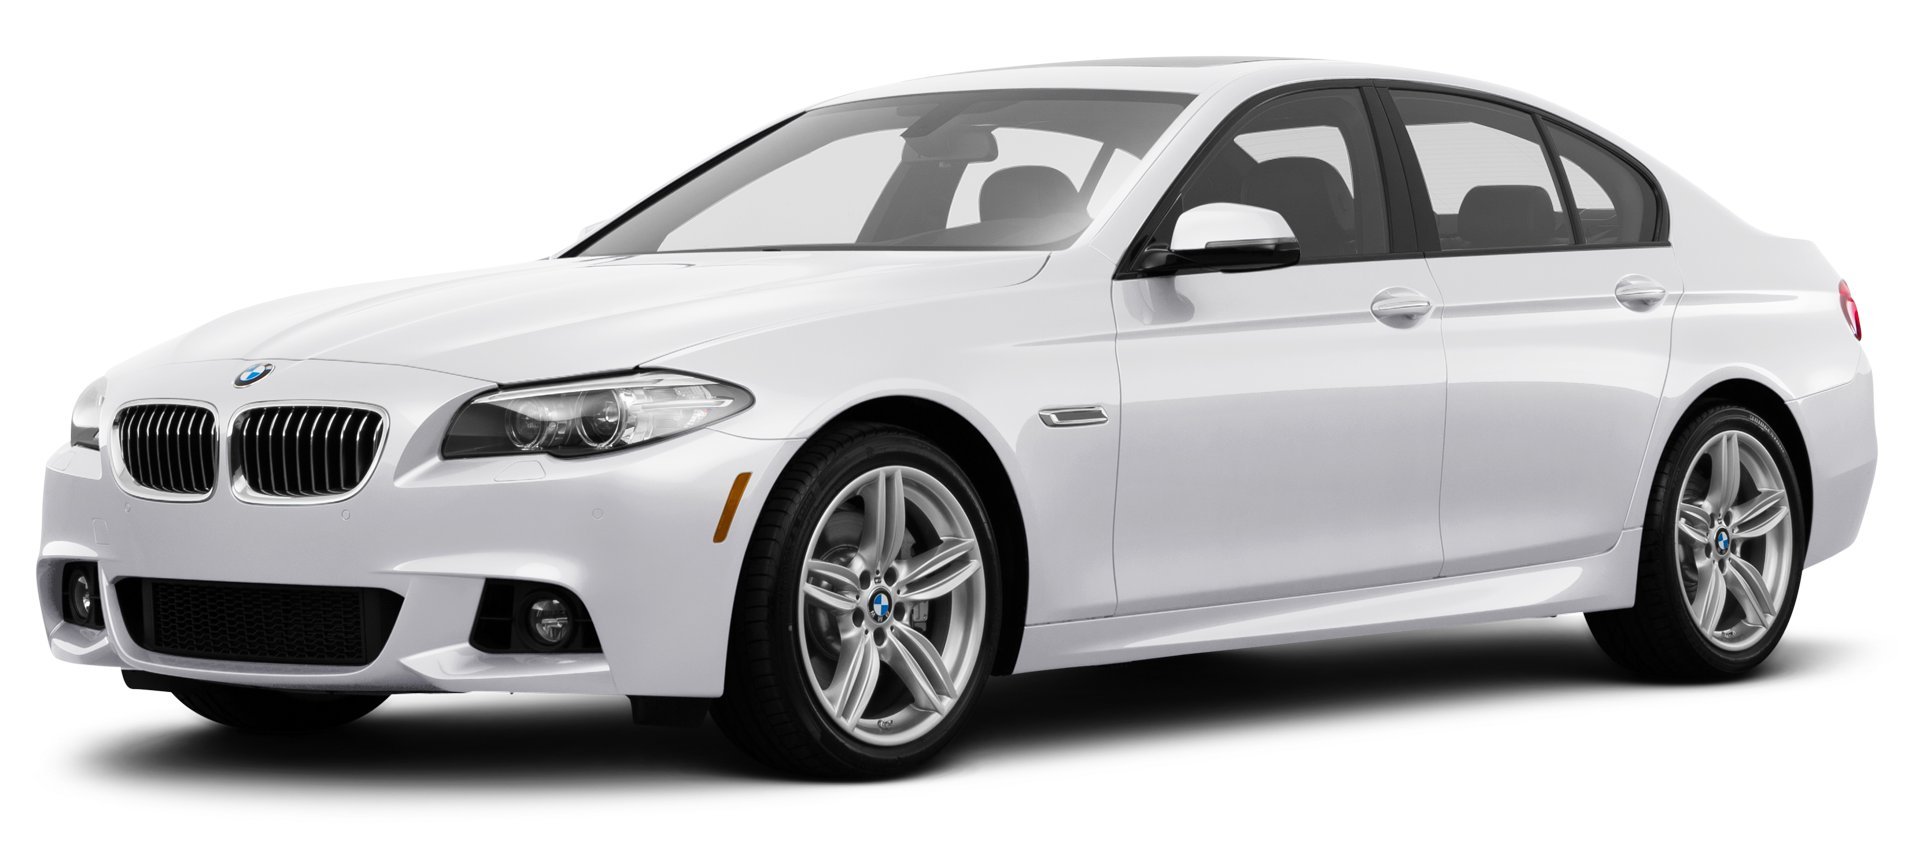  BMW 535I oem parts and accessories on sale